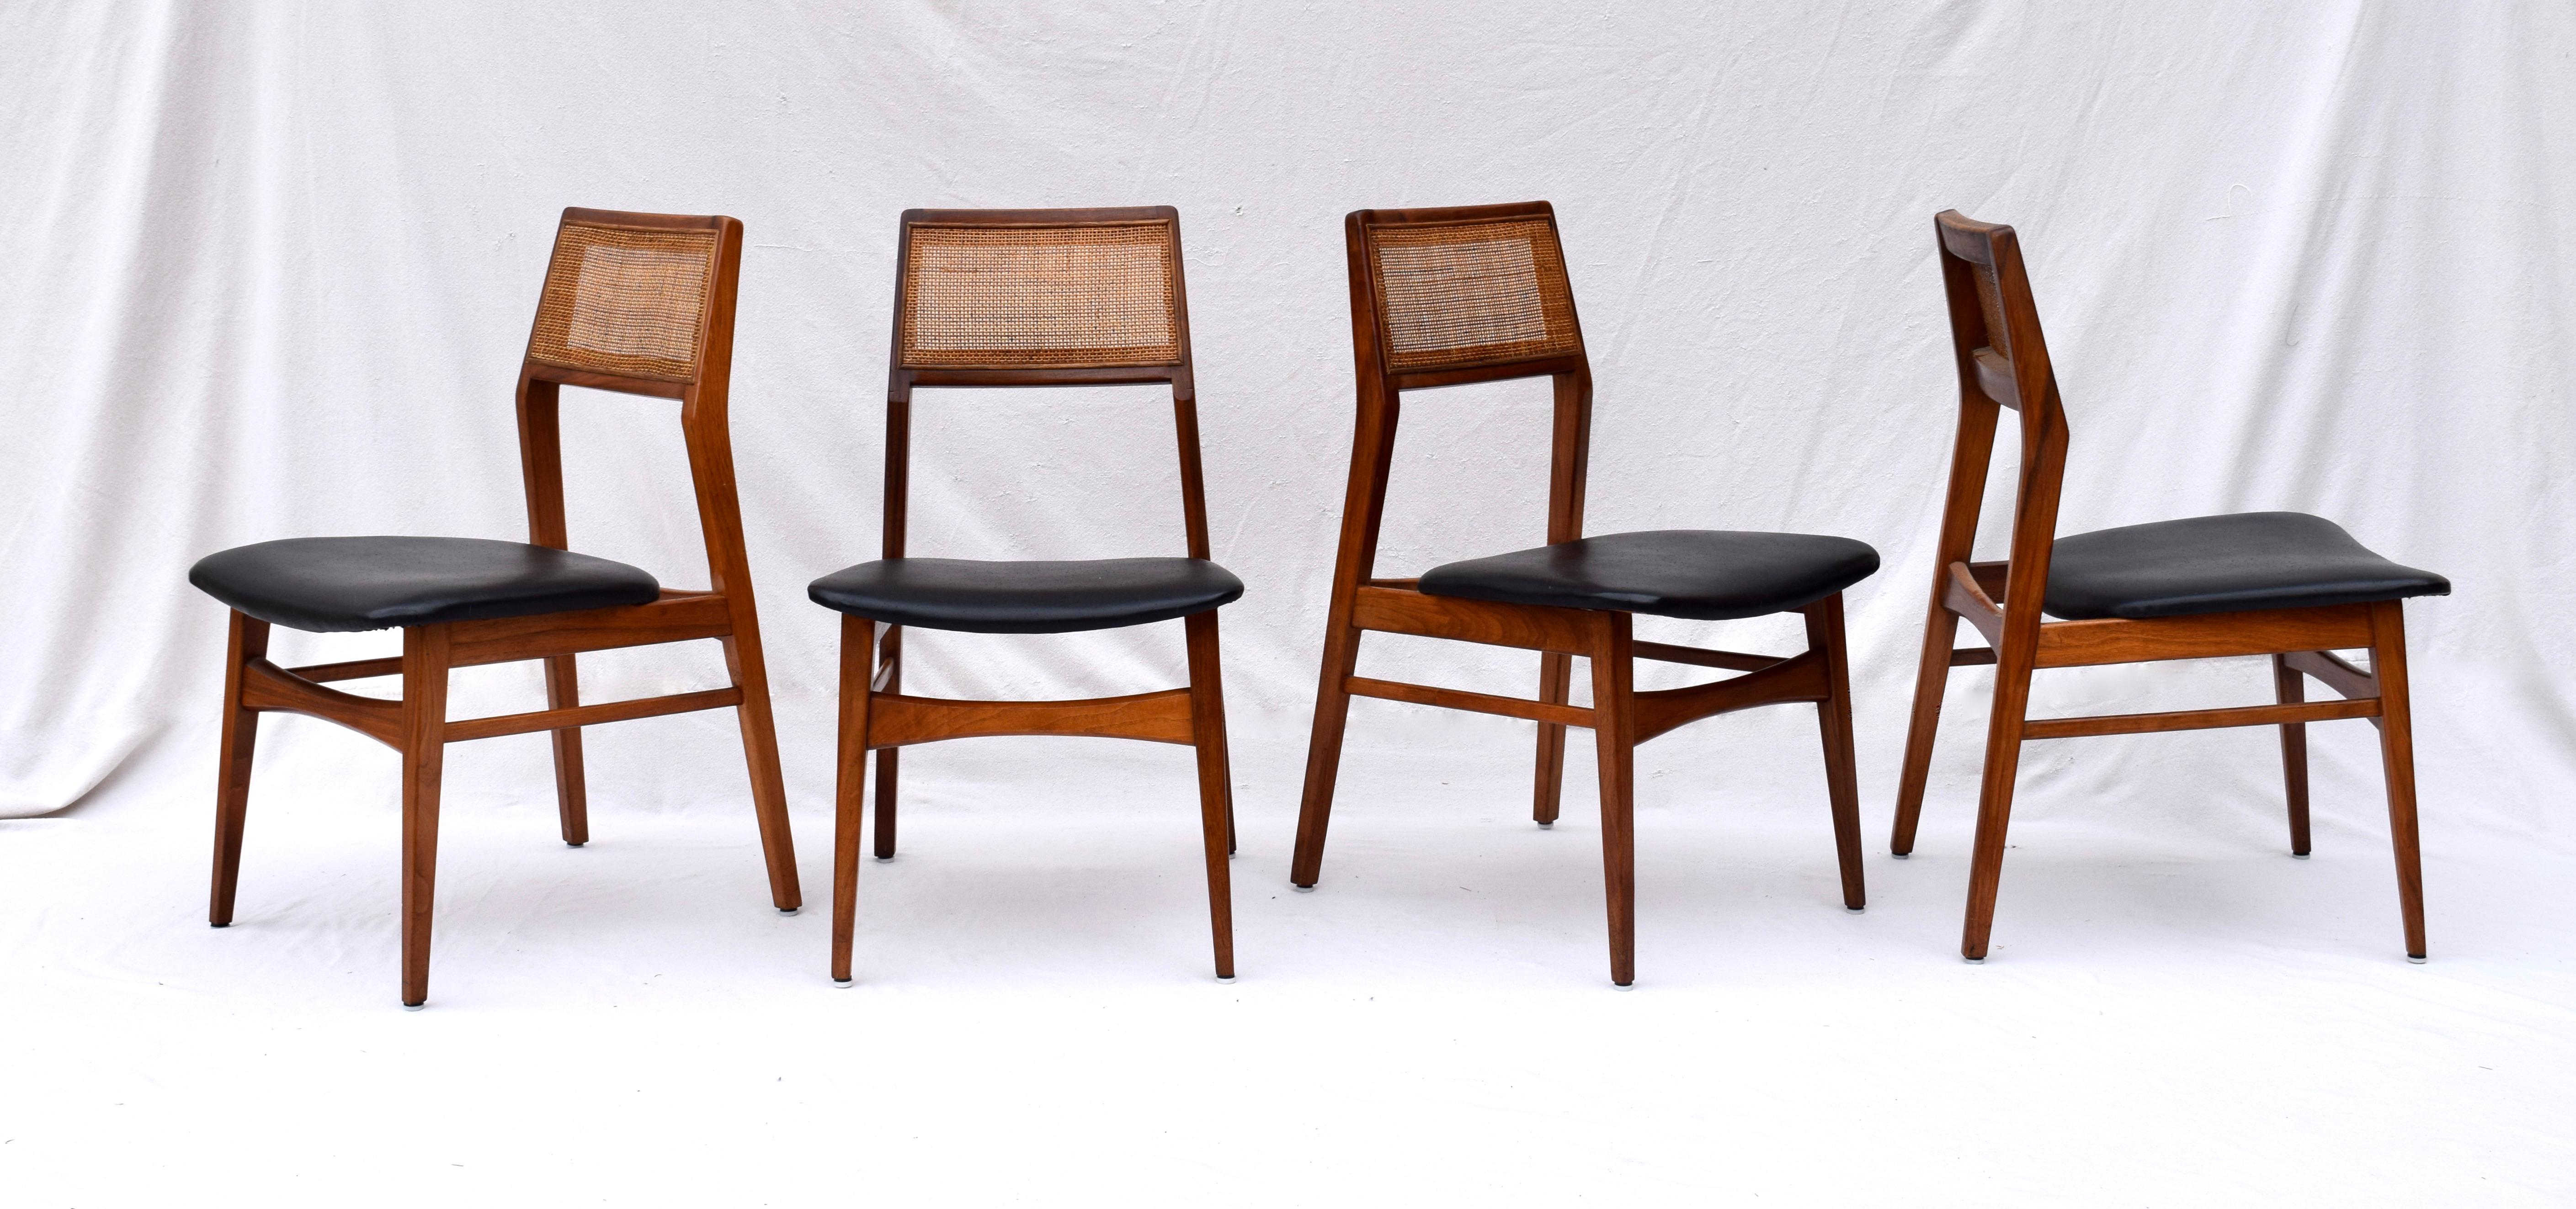 Set of 6 Foster McDavid midcentury dining chairs with comfortable black naugahyde seats and caned backs. Original finish in beautifully maintained condition in the distinct style of Jens Risom.